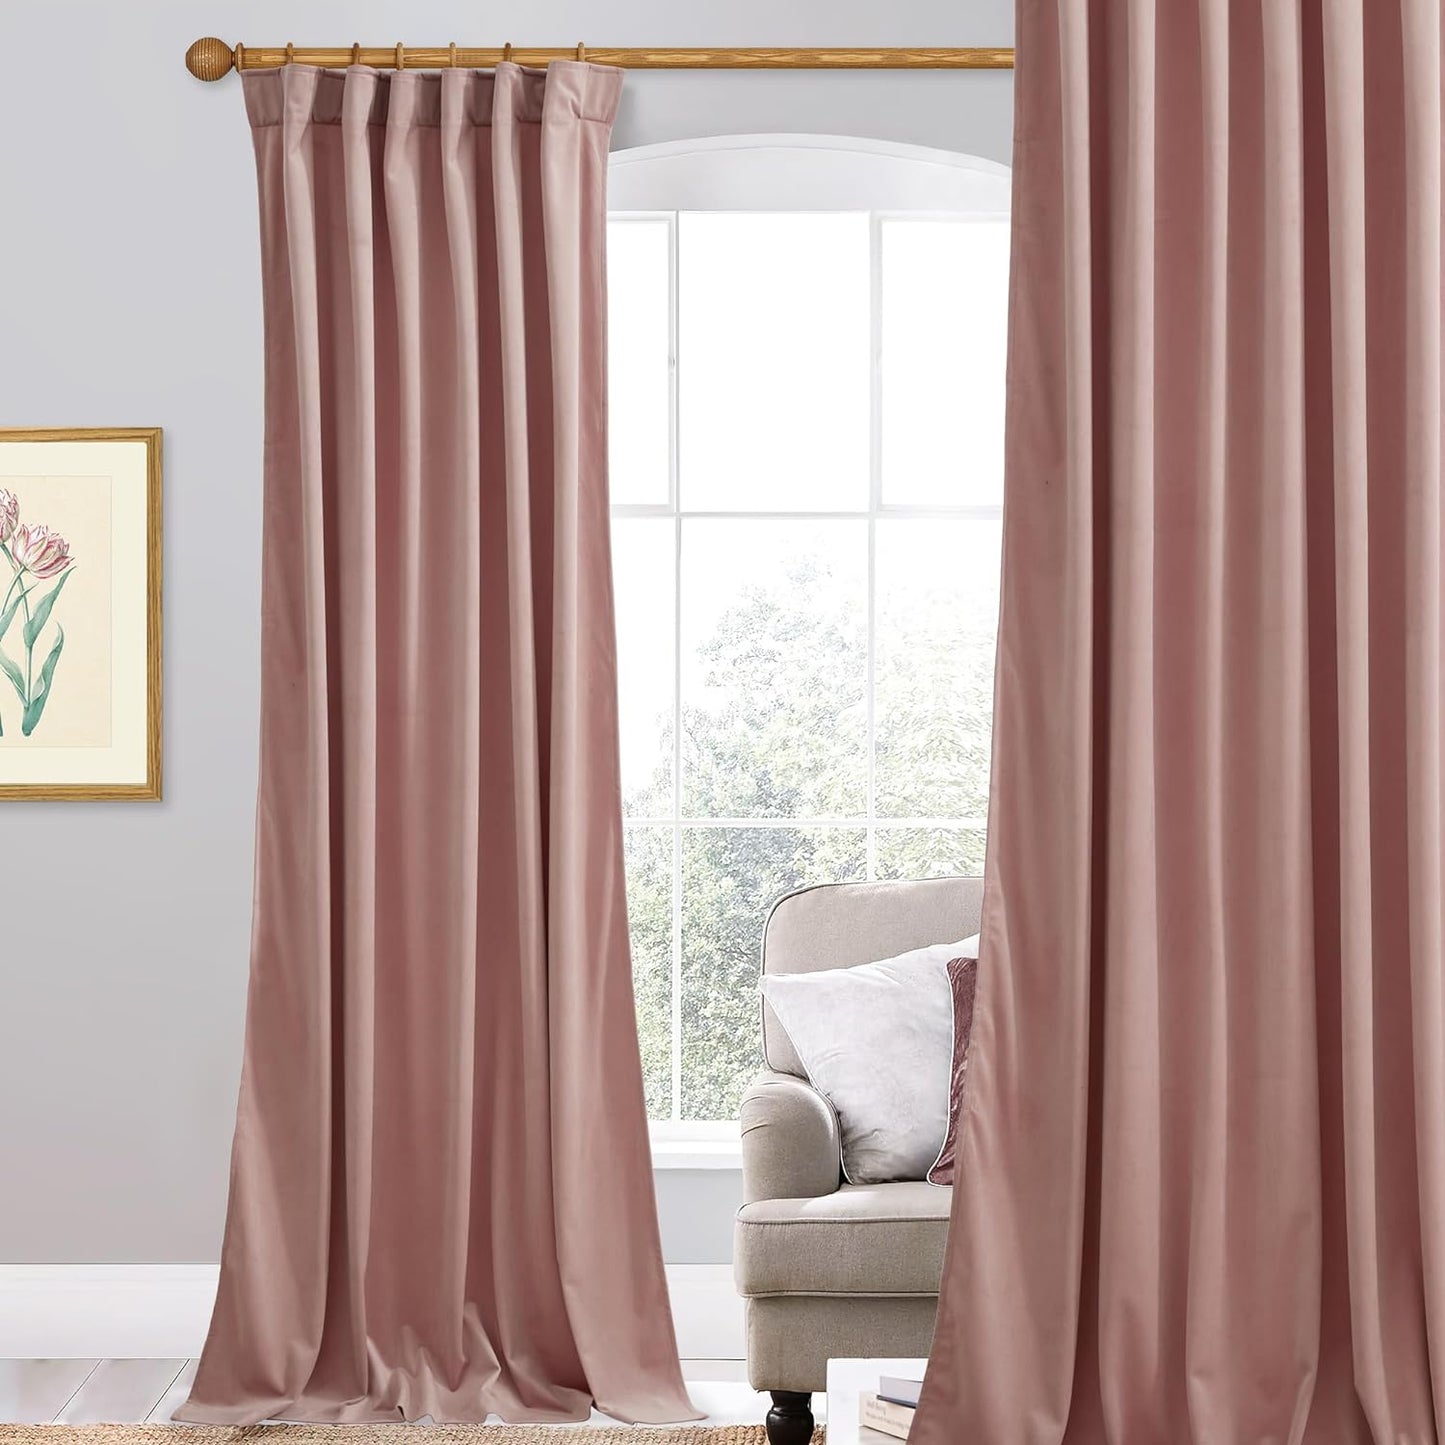 Stangh Navy Blue Velvet Curtains 96 Inches Long for Living Room, Luxury Blackout Sliding Door Curtains Thermal Insulated Window Drapes for Bedroom, W52 X L96 Inches, 1 Panel  StangH Dusty Pink W52 X L84 